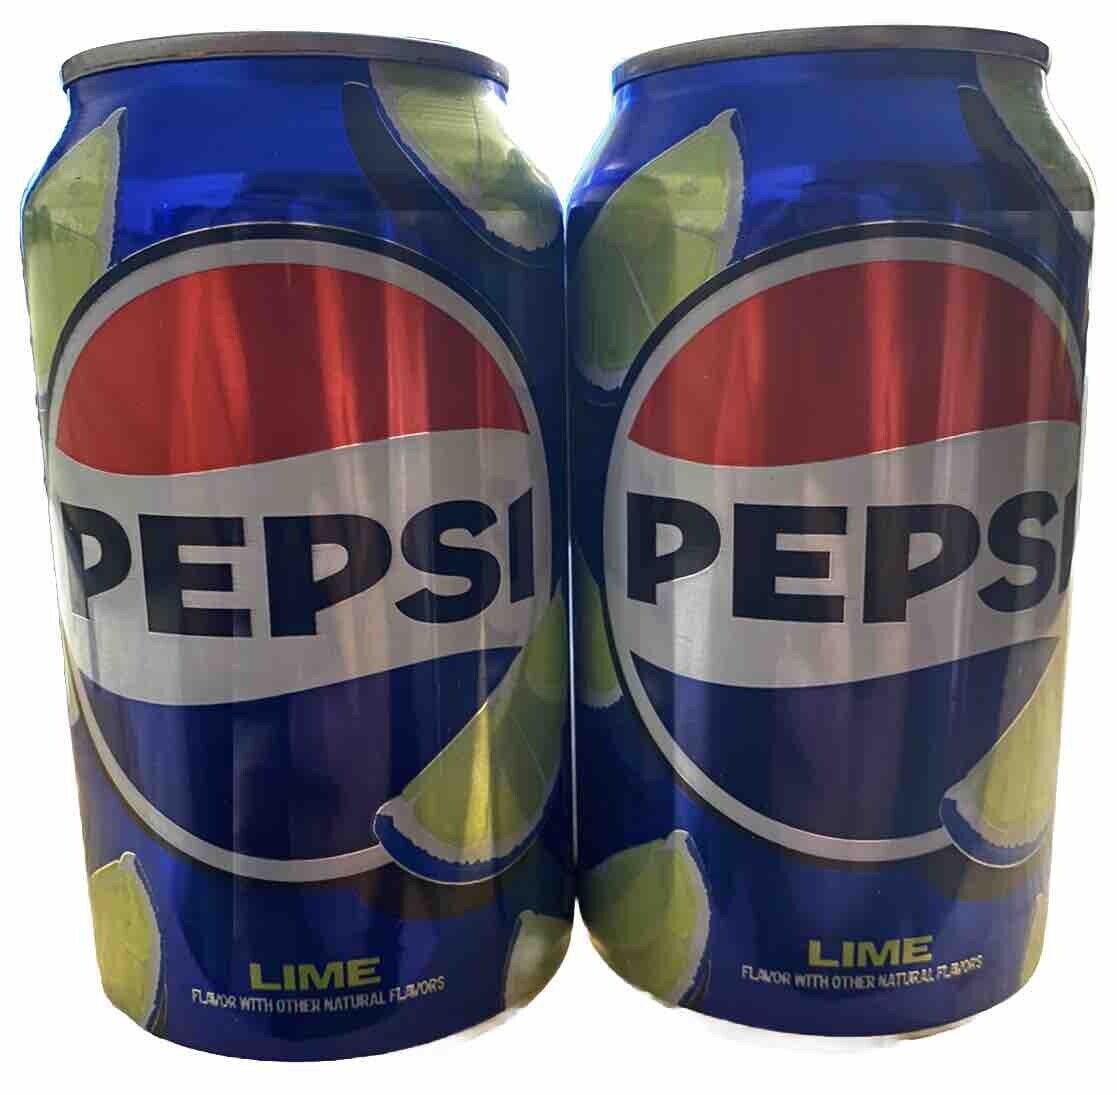 BRAND NEW LIMITED EDITION RARE PEPSI LIME FLAVORED SODA (2 CANS) 12 FL OZ 335 ML